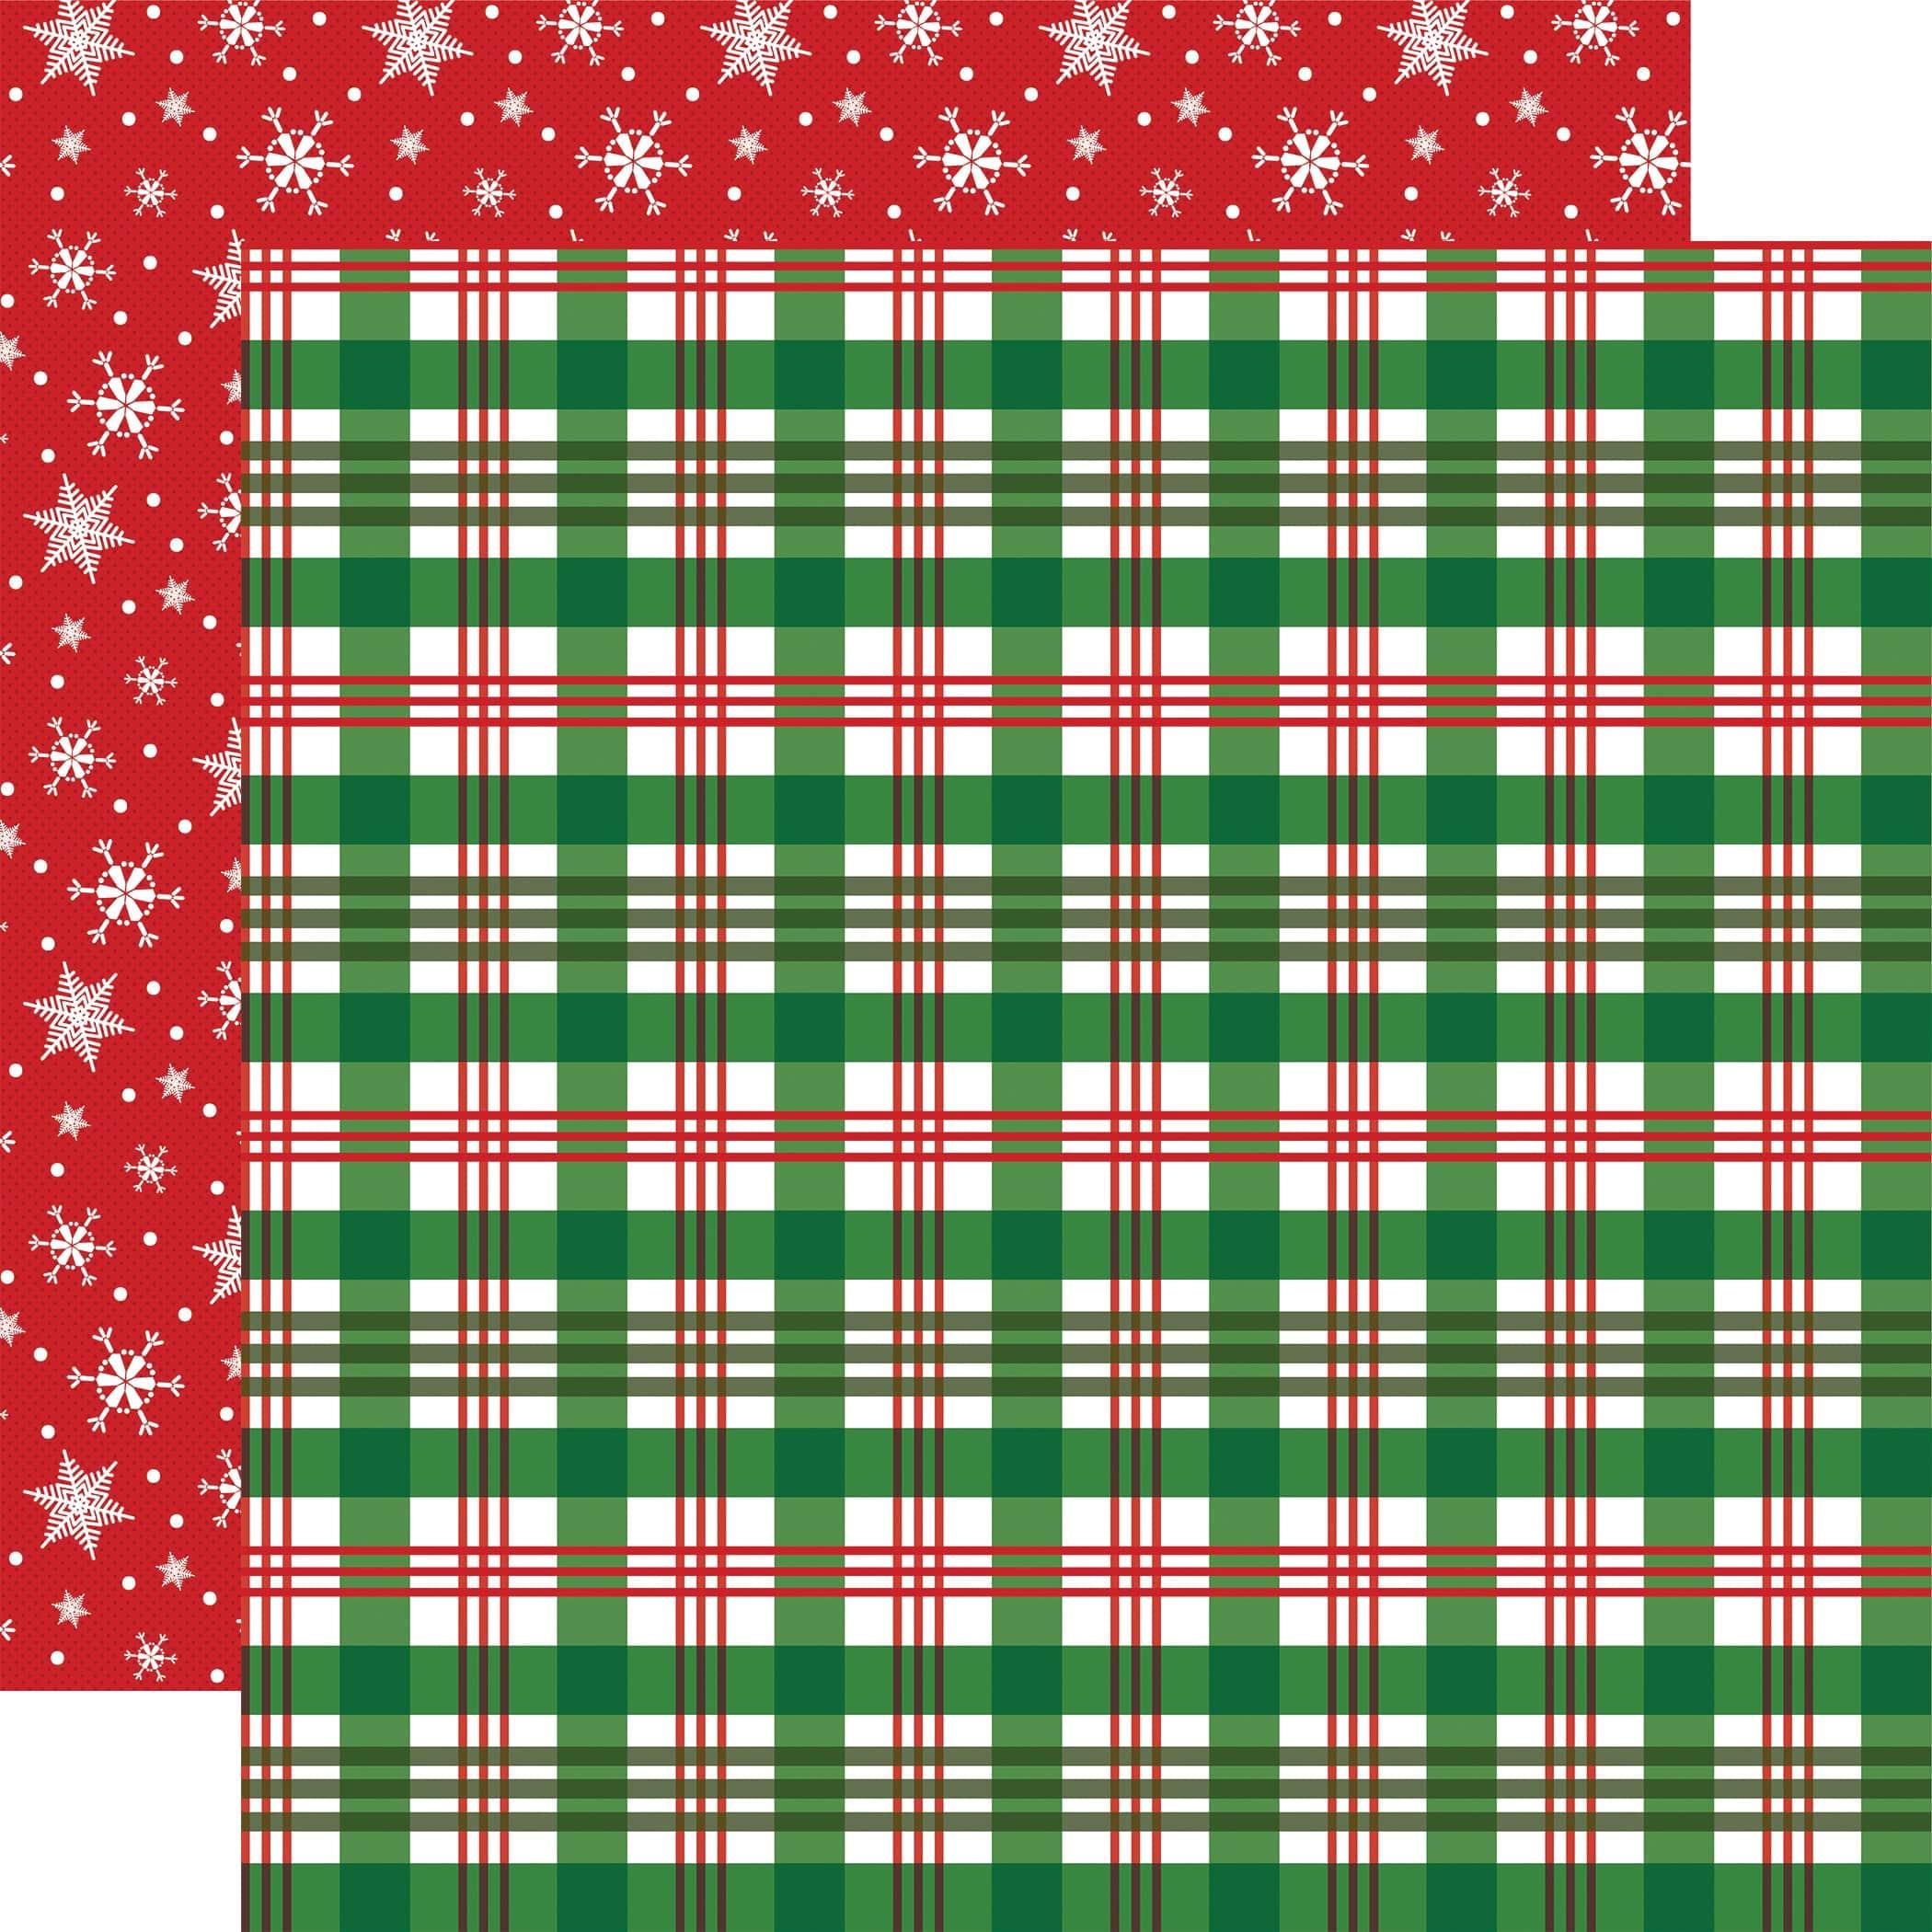 White Christmas Collection Christmas Plaid 12 x 12 Double-Sided Scrapbook Paper by Carta Bella - Scrapbook Supply Companies